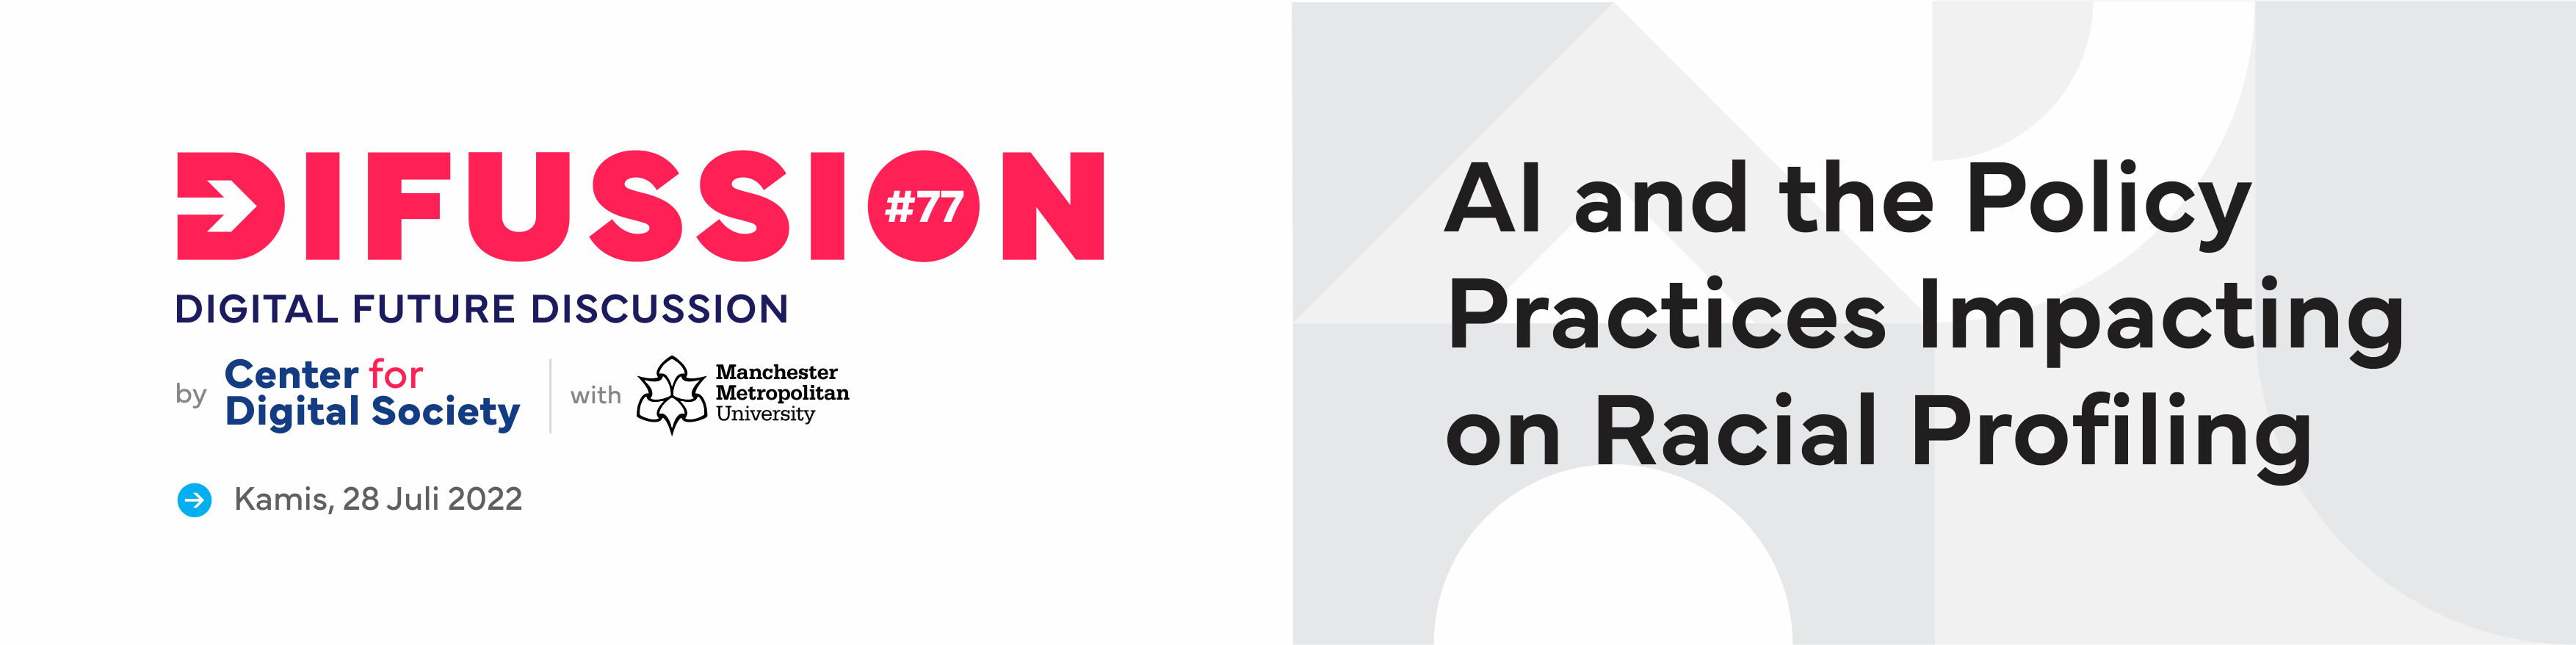 [SIARAN PERS] AI and The Policy Practices Impacting On Racial Profiling | Difussion #77